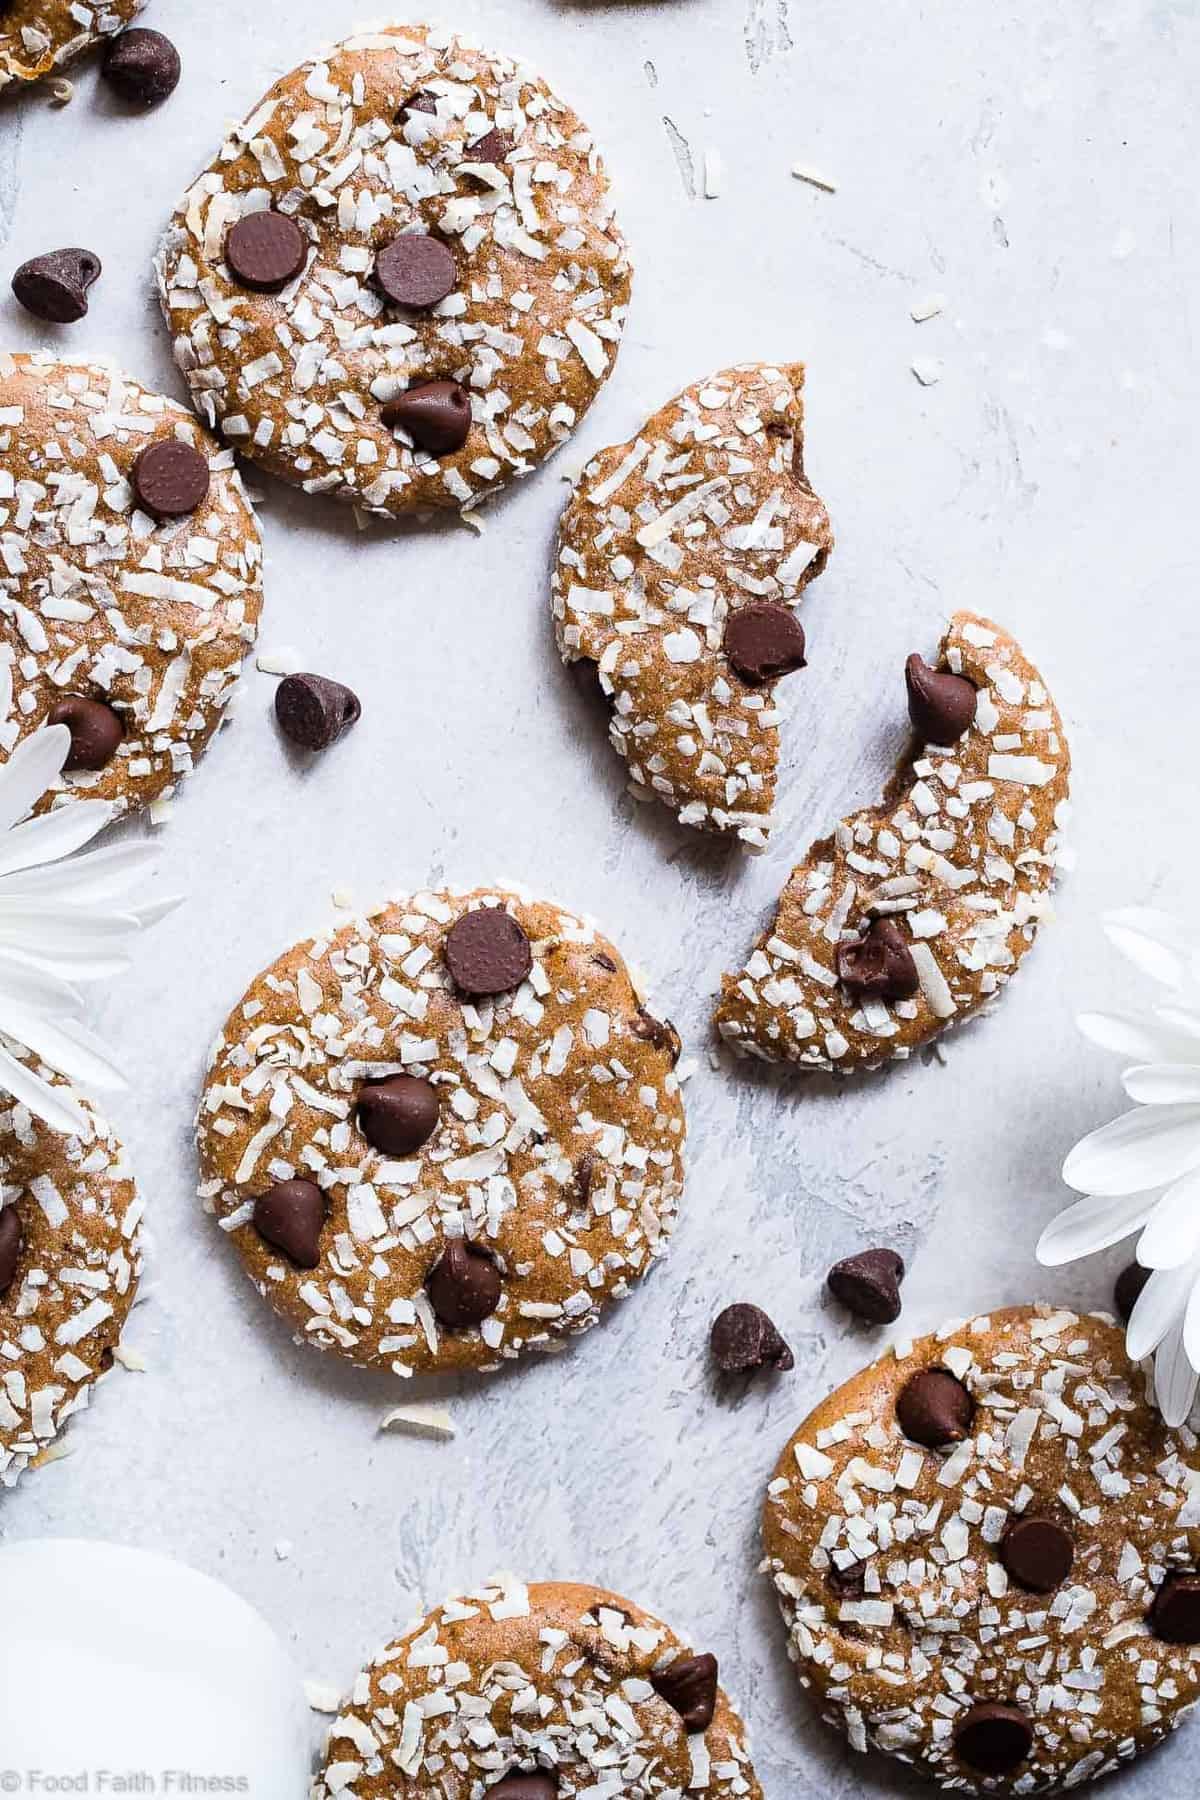 Almond Chocolate Chip Coconut Protein Cookies - This EASY protein cookie recipe use almond butter to make them extra soft and chewy! You will never know these are gluten free, healthy and packed with protein! | #Foodfaithfitness | #Glutenfree #Healthy #Cookies #Coconut #ChocolateChip